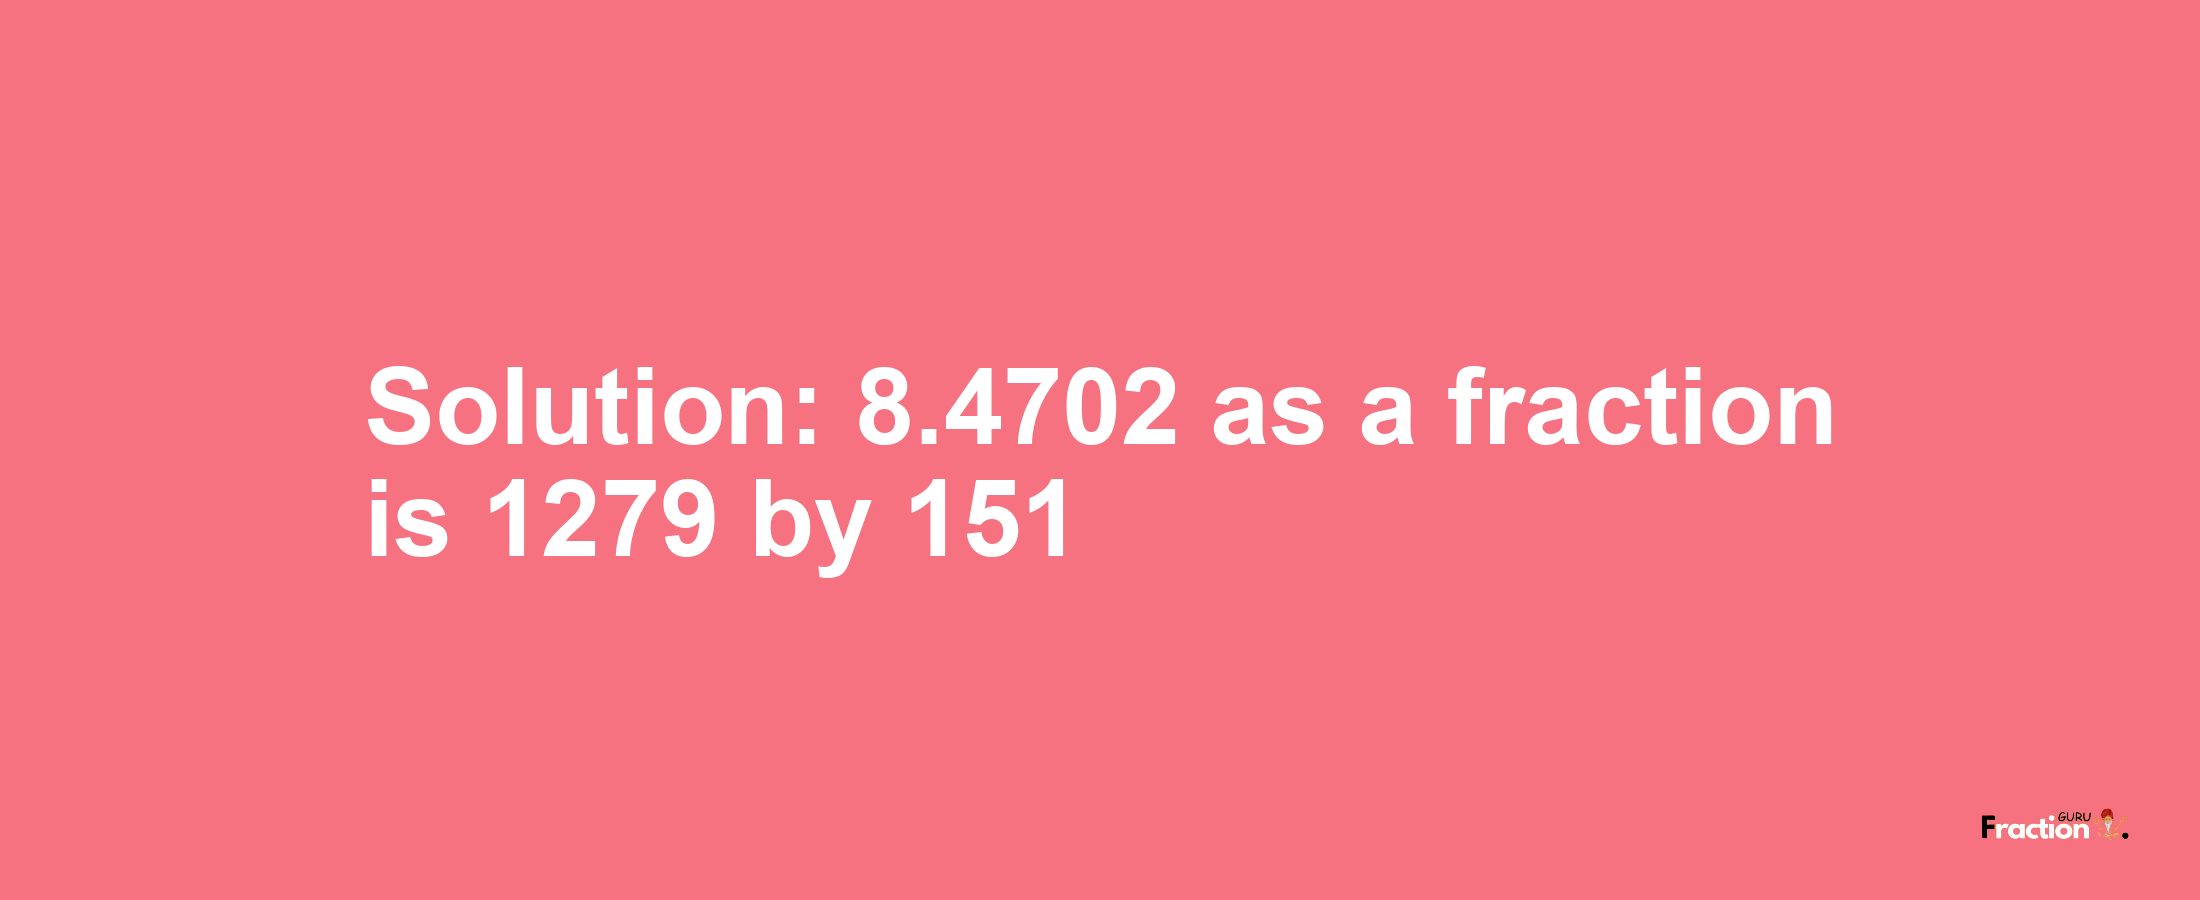 Solution:8.4702 as a fraction is 1279/151